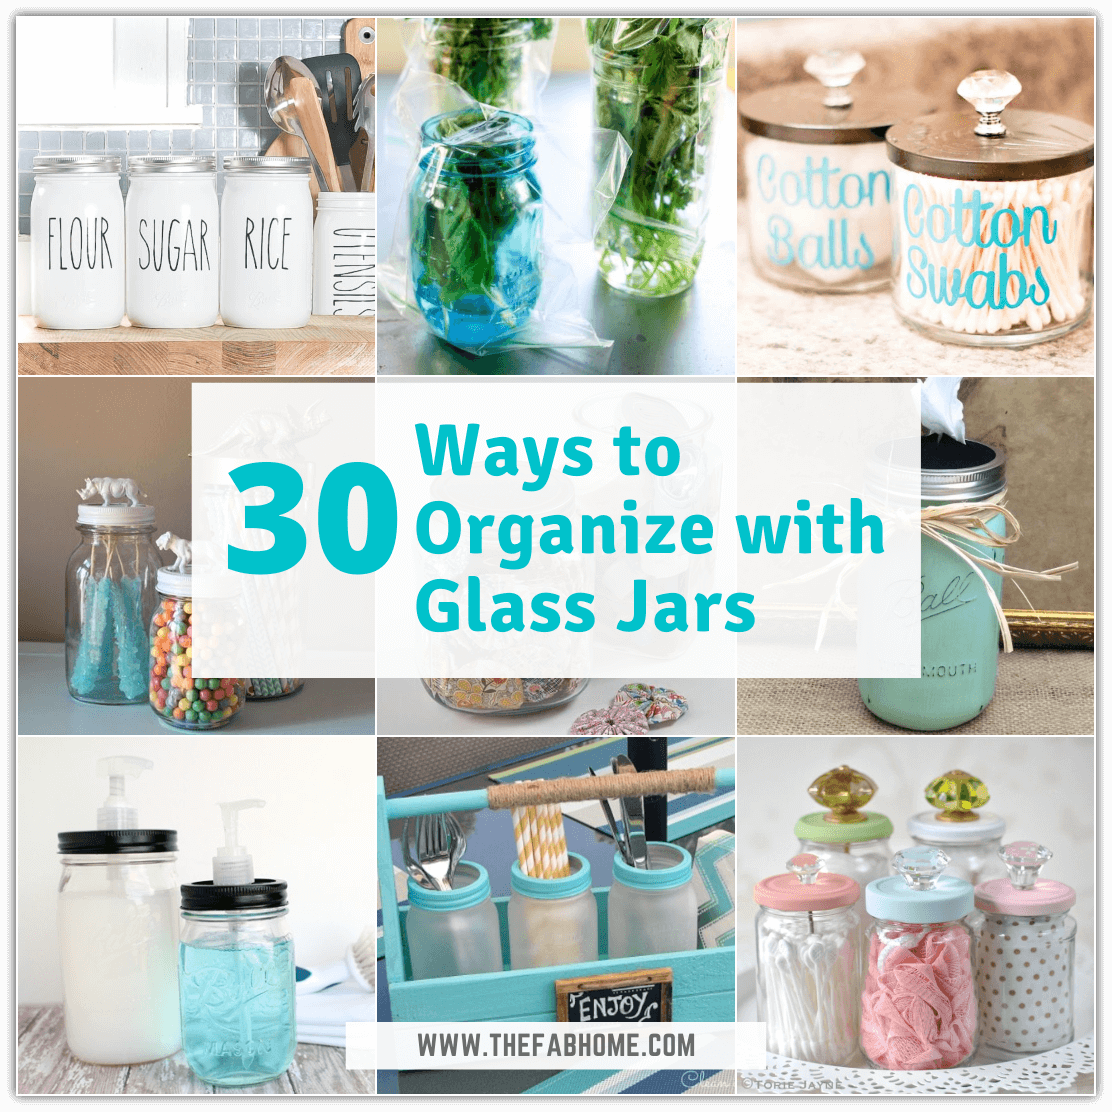 https://thefabhome.com/wp-content/uploads/2021/07/Ways-to-Organize-with-Glass-Jars.png